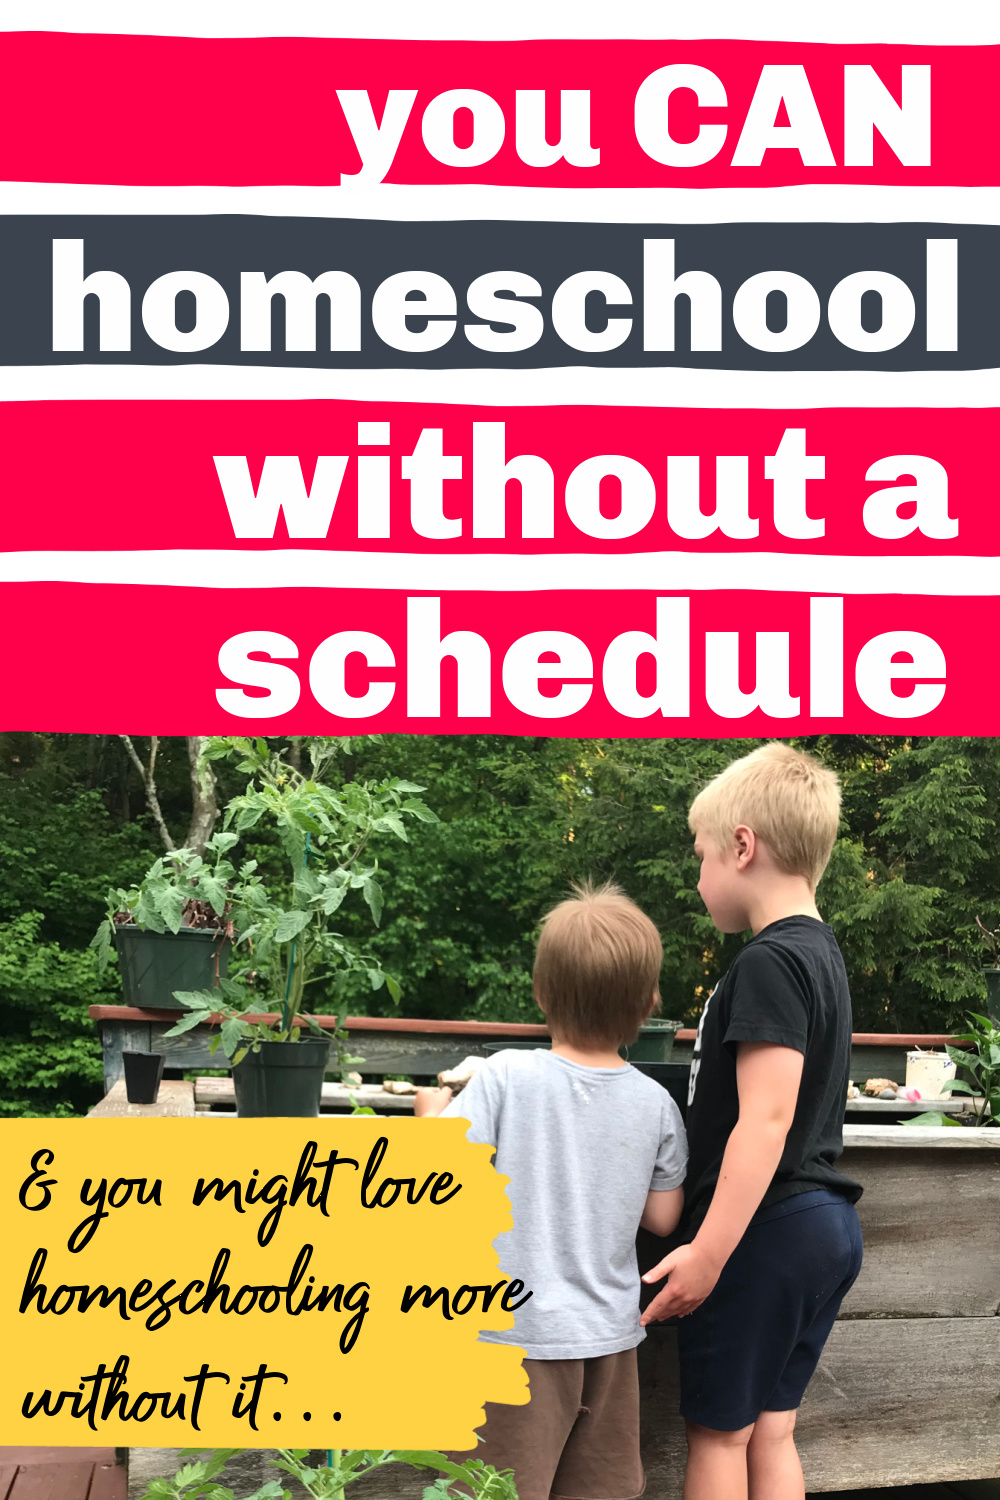 brothers gardening together with text overlay, "you can homeschool without a schedule & you might love homeschooling more without it..."